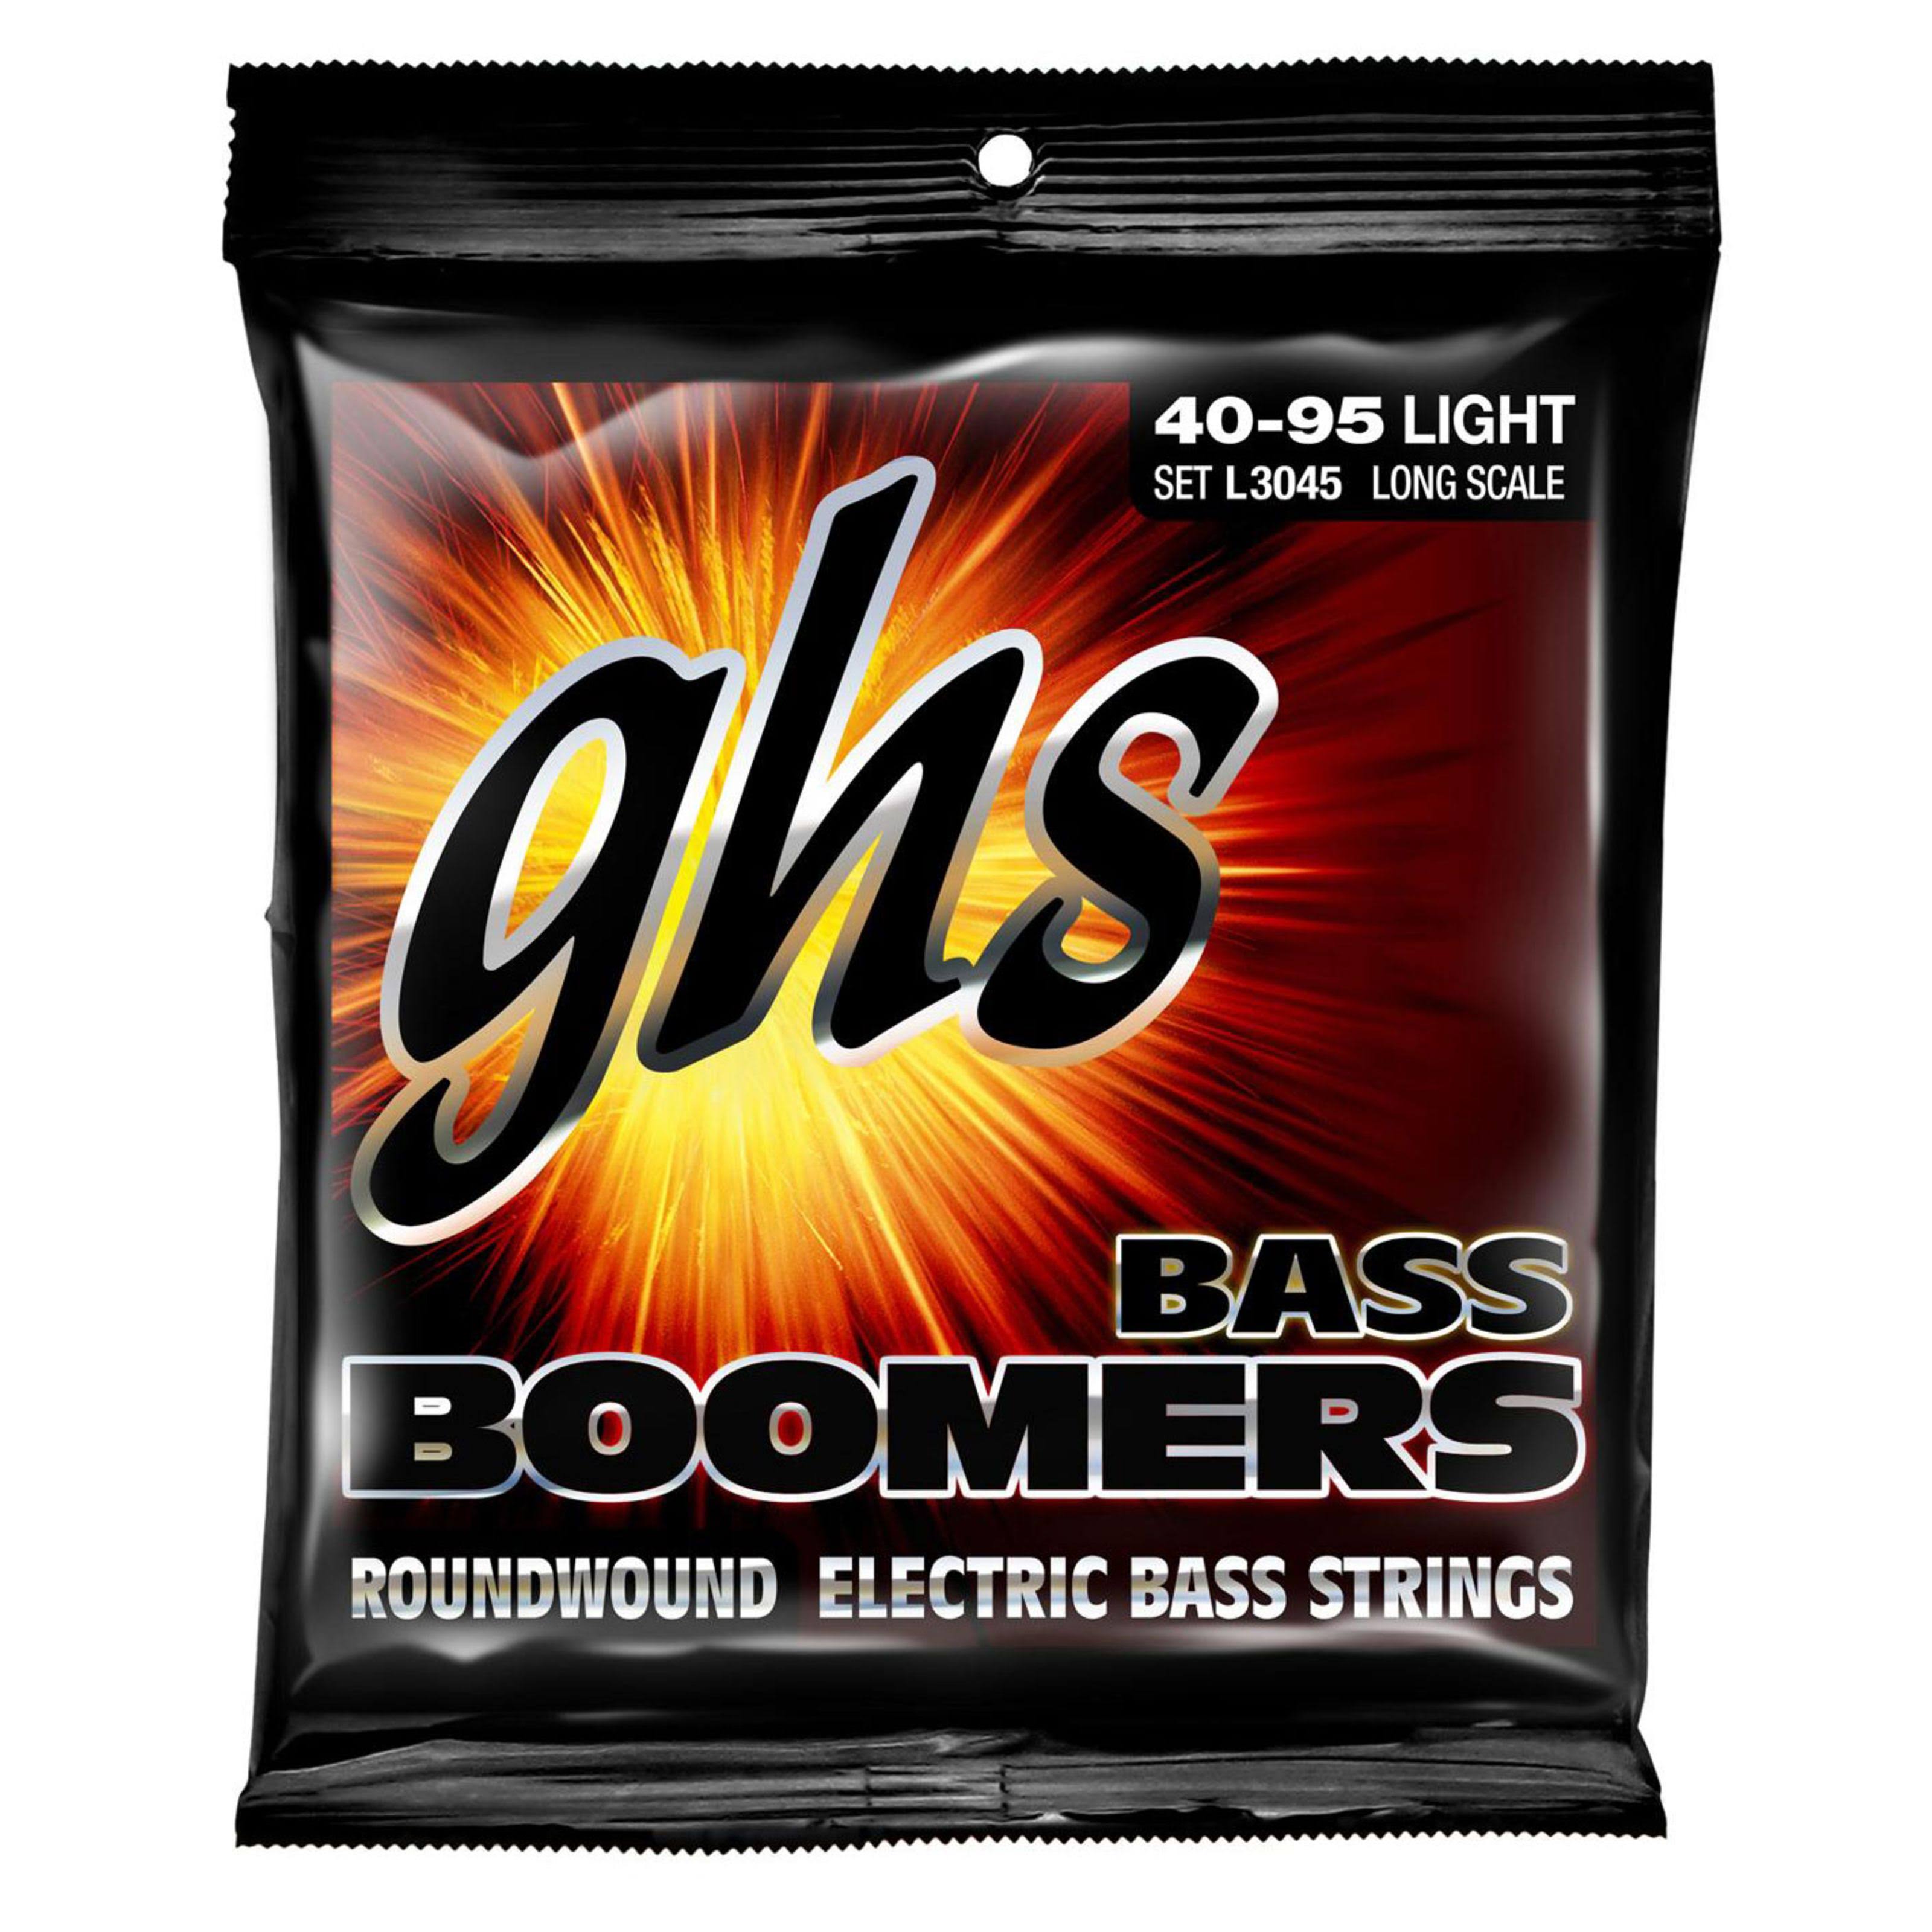 GHS L3045 Bass Boomers 4 String Roundwound Electric Bass Strings - Long Scale, 40-95 Light